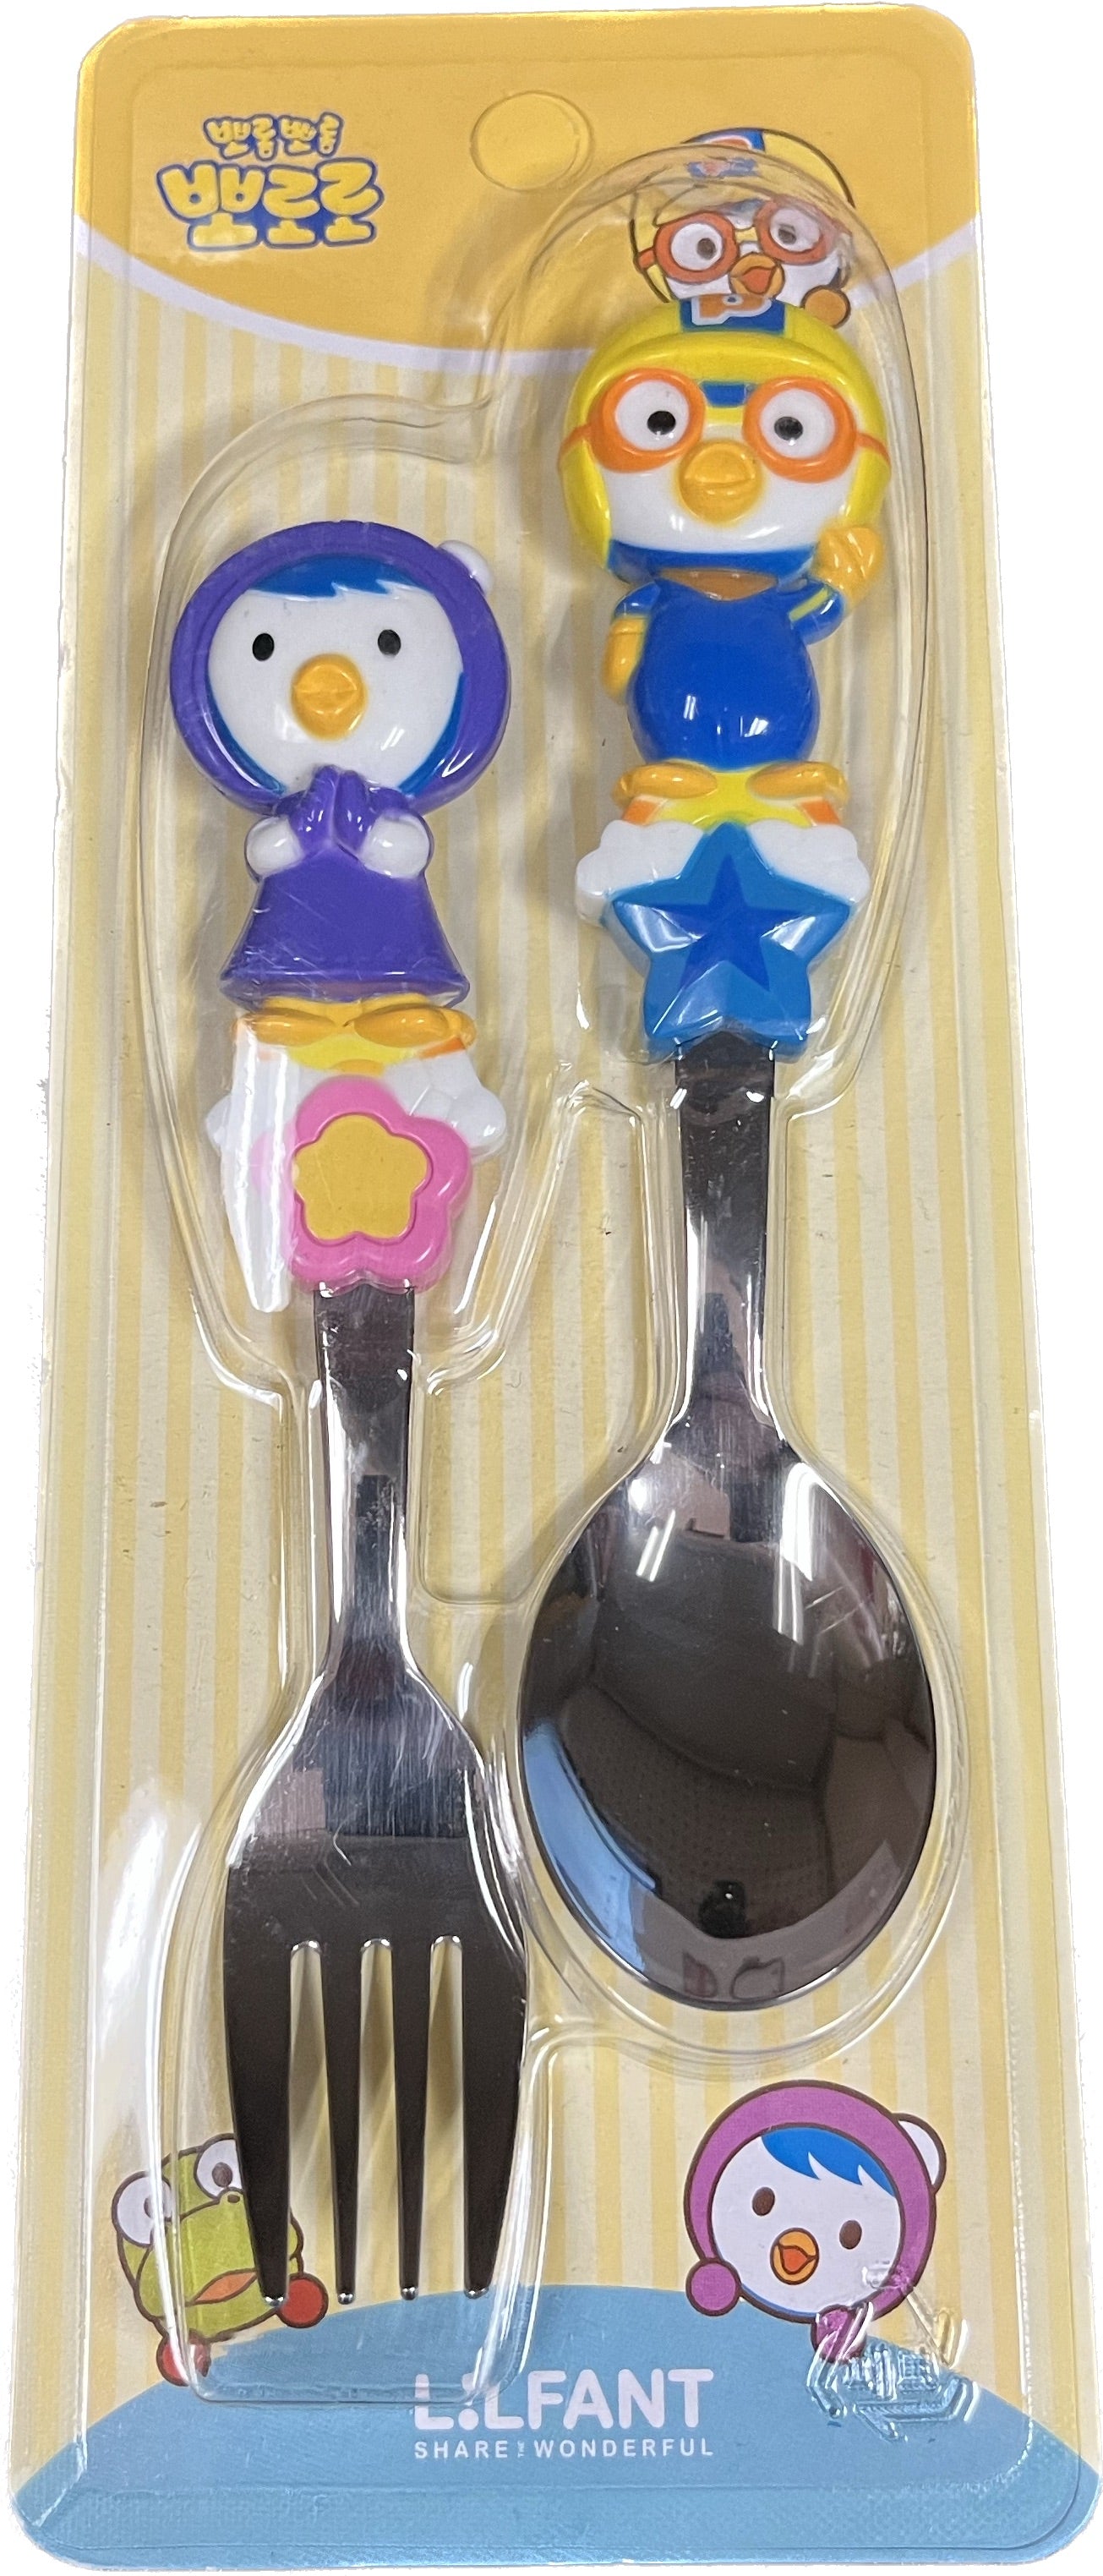 Lilfant Pororo Stainless Steel Spook and Fork Set-1